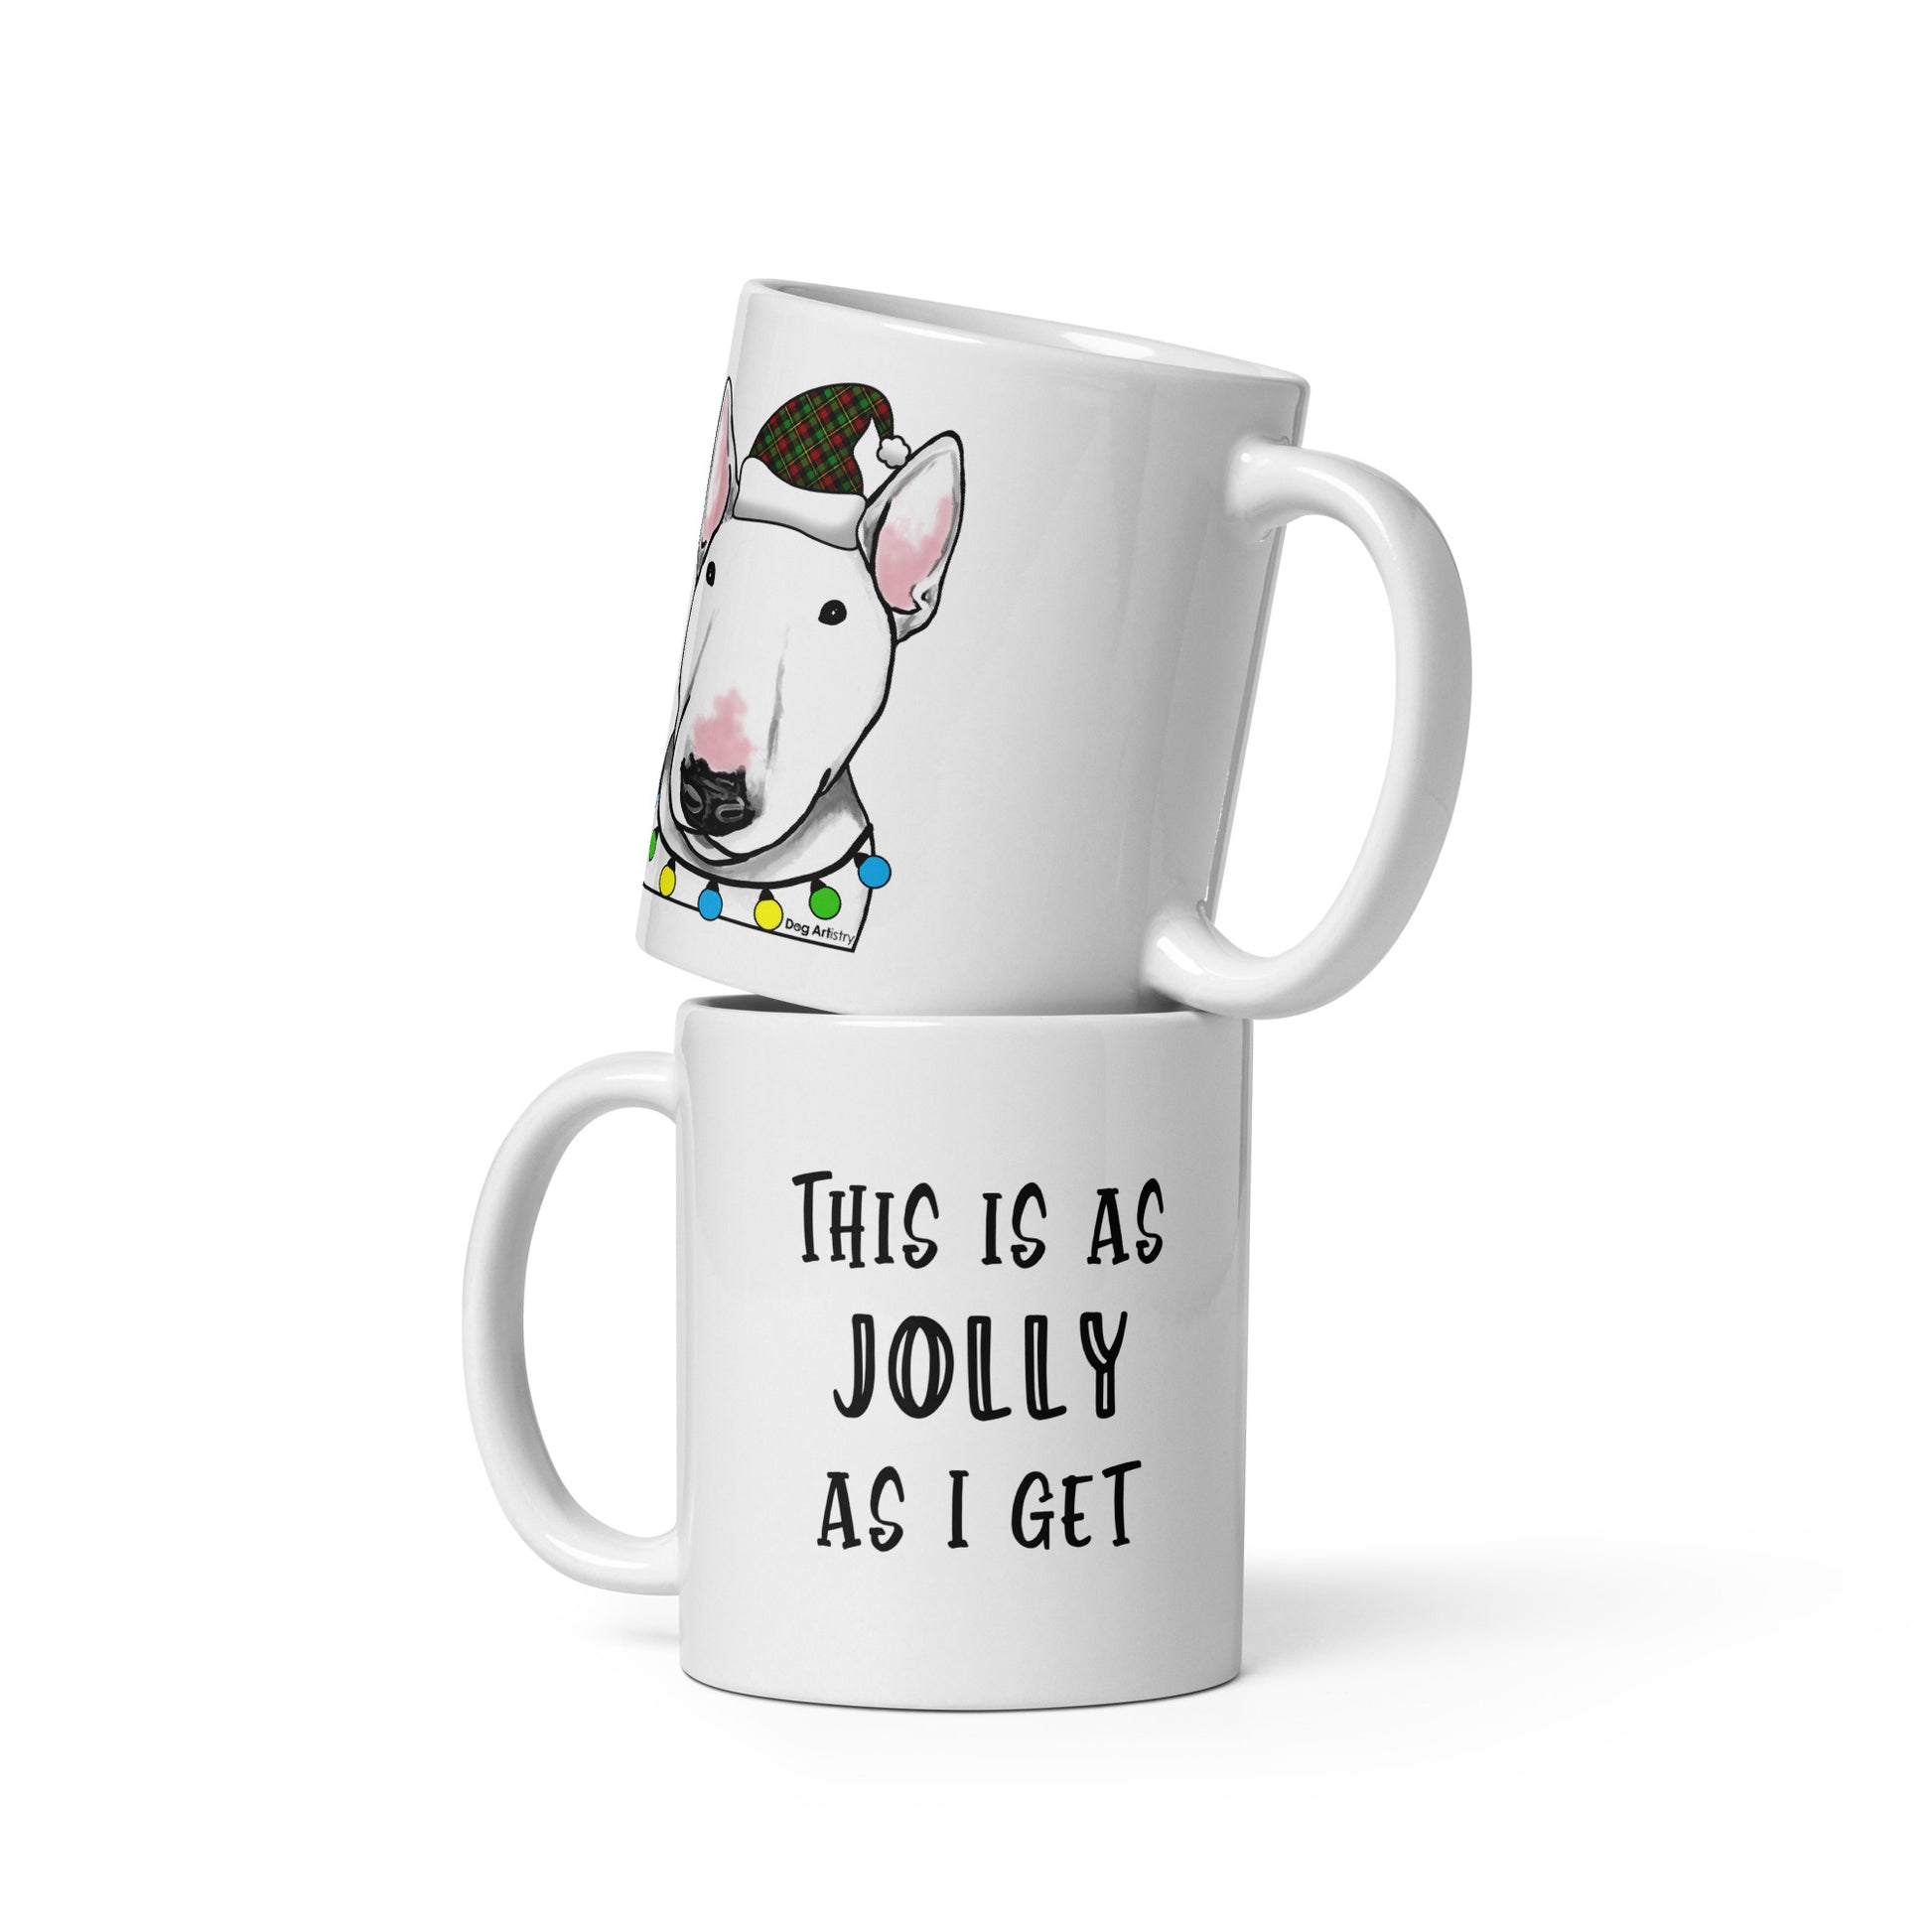 English Bull Terrier This Is As Jolly As I Get Holiday Coffee Mug by Dog Artistry